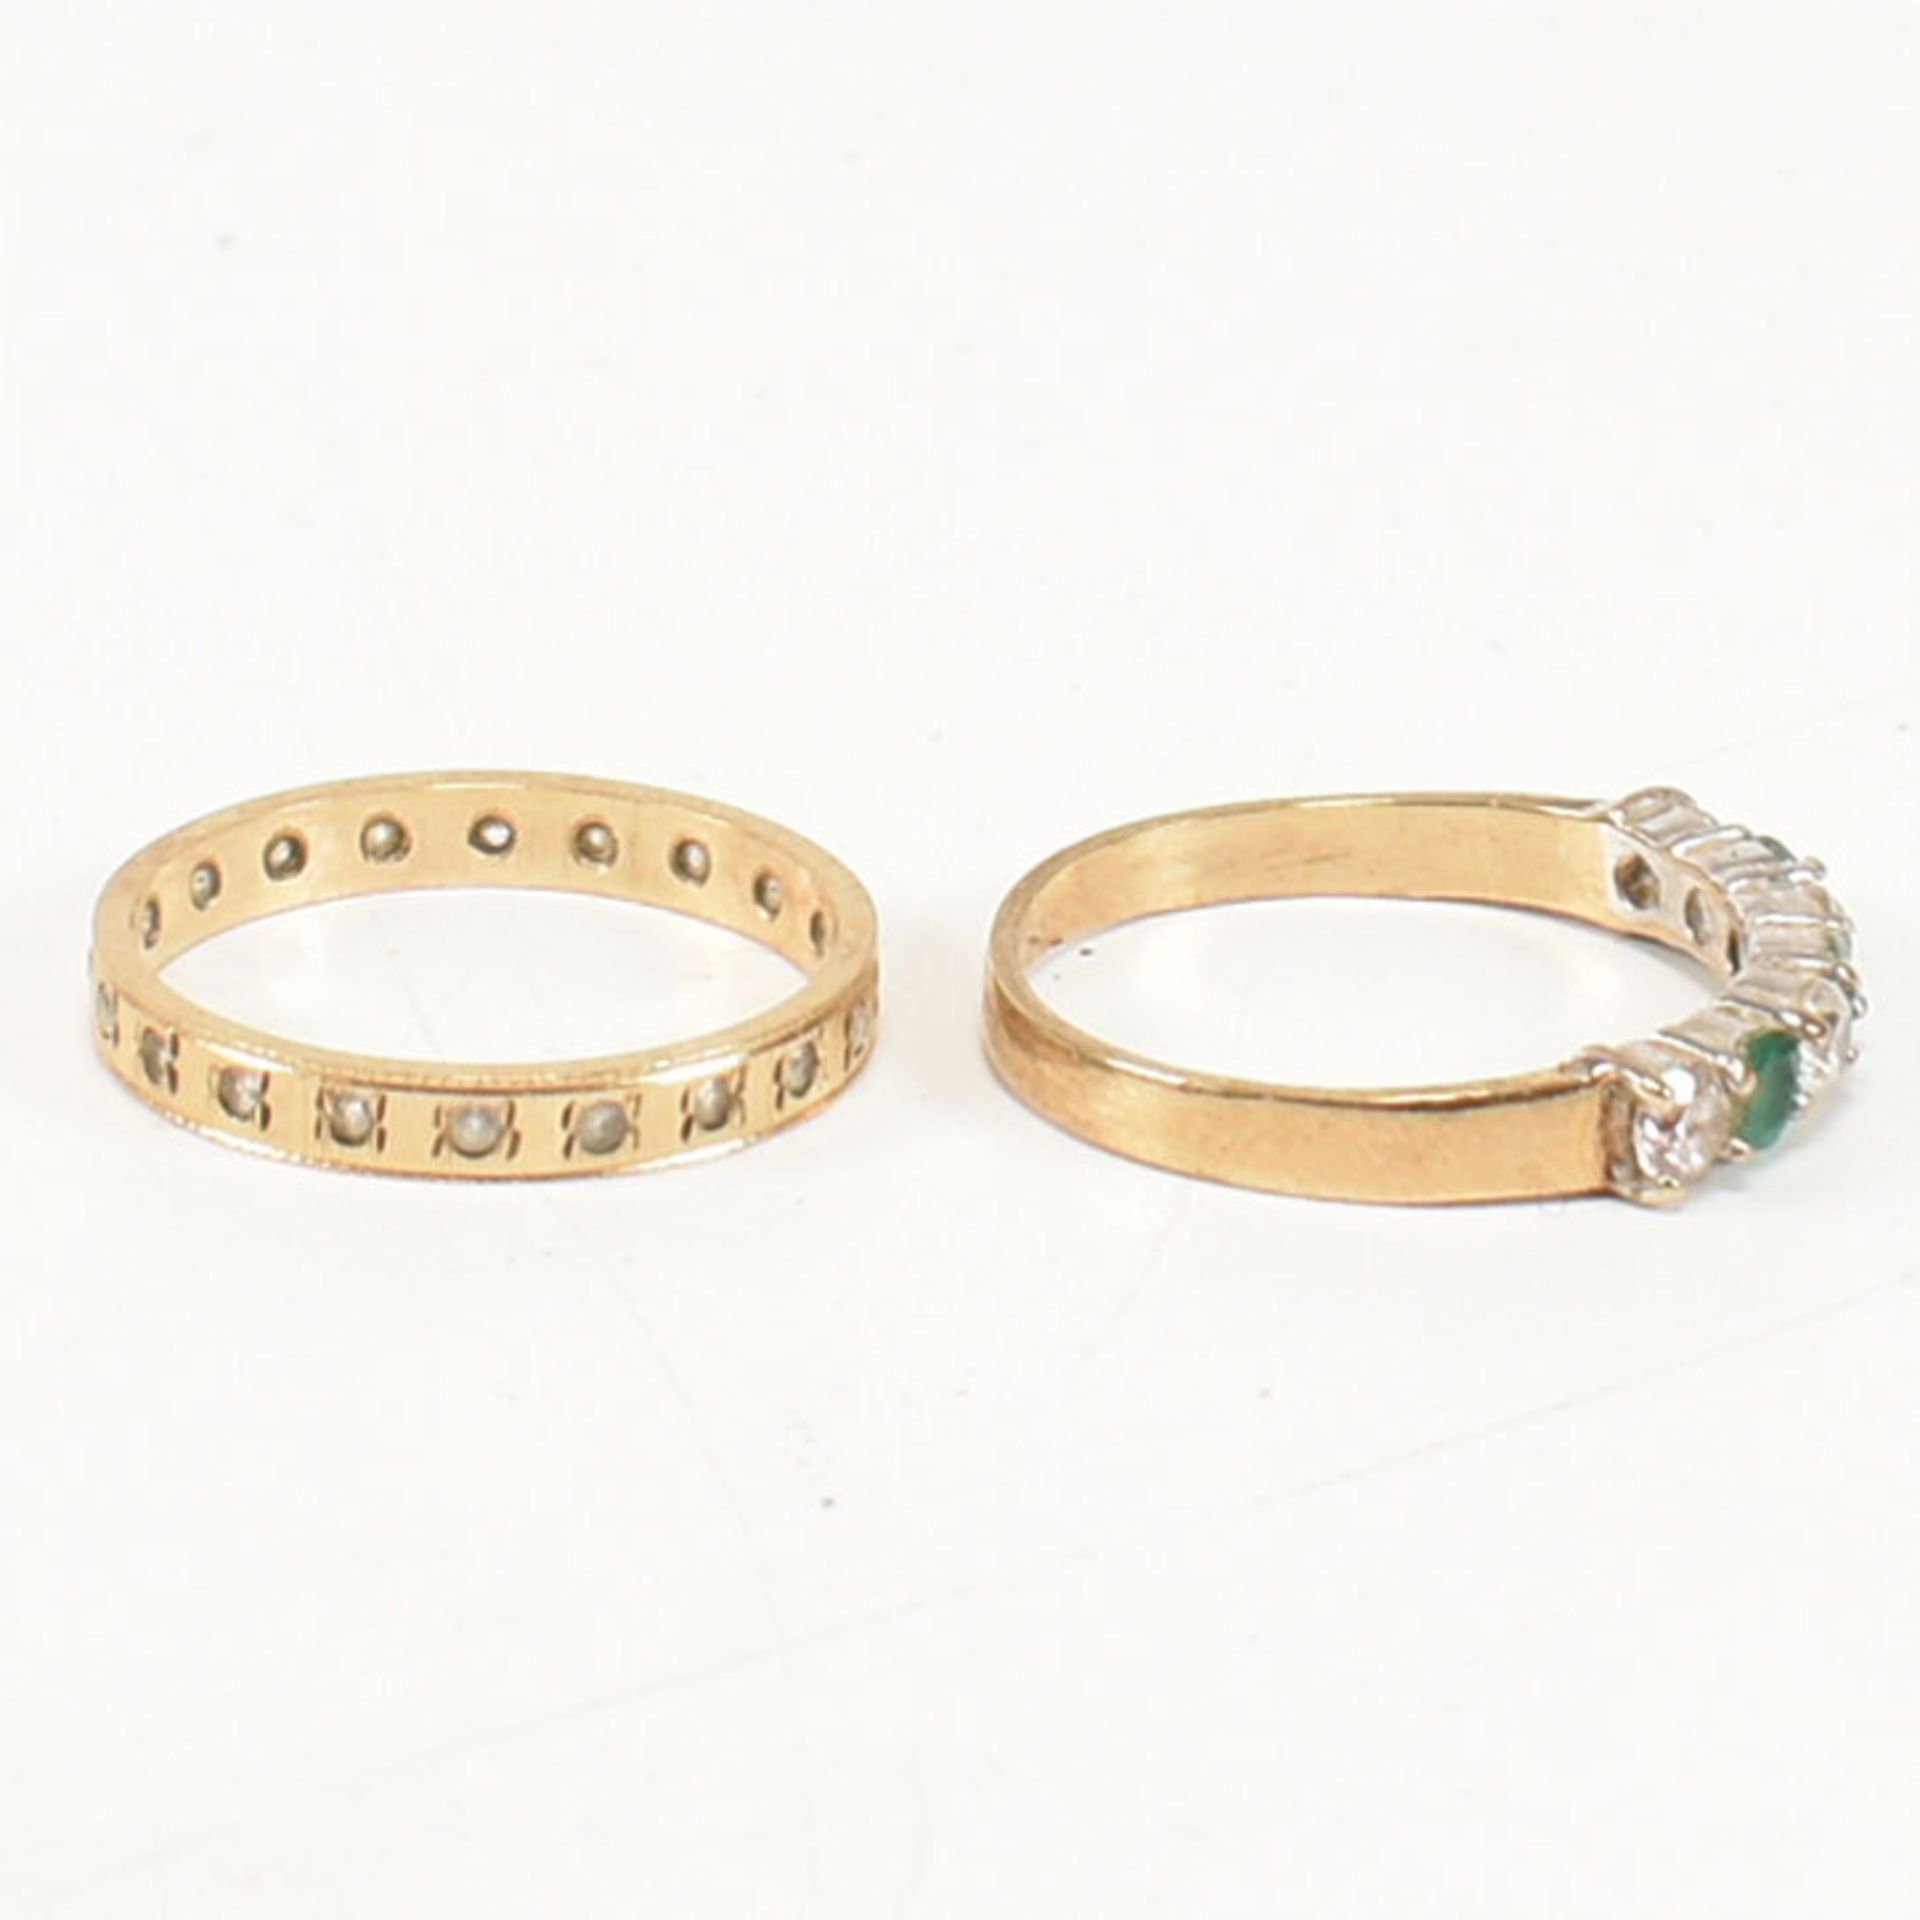 TWO HALLMARKED 9CT GOLD GEM SET RINGS - Image 6 of 11